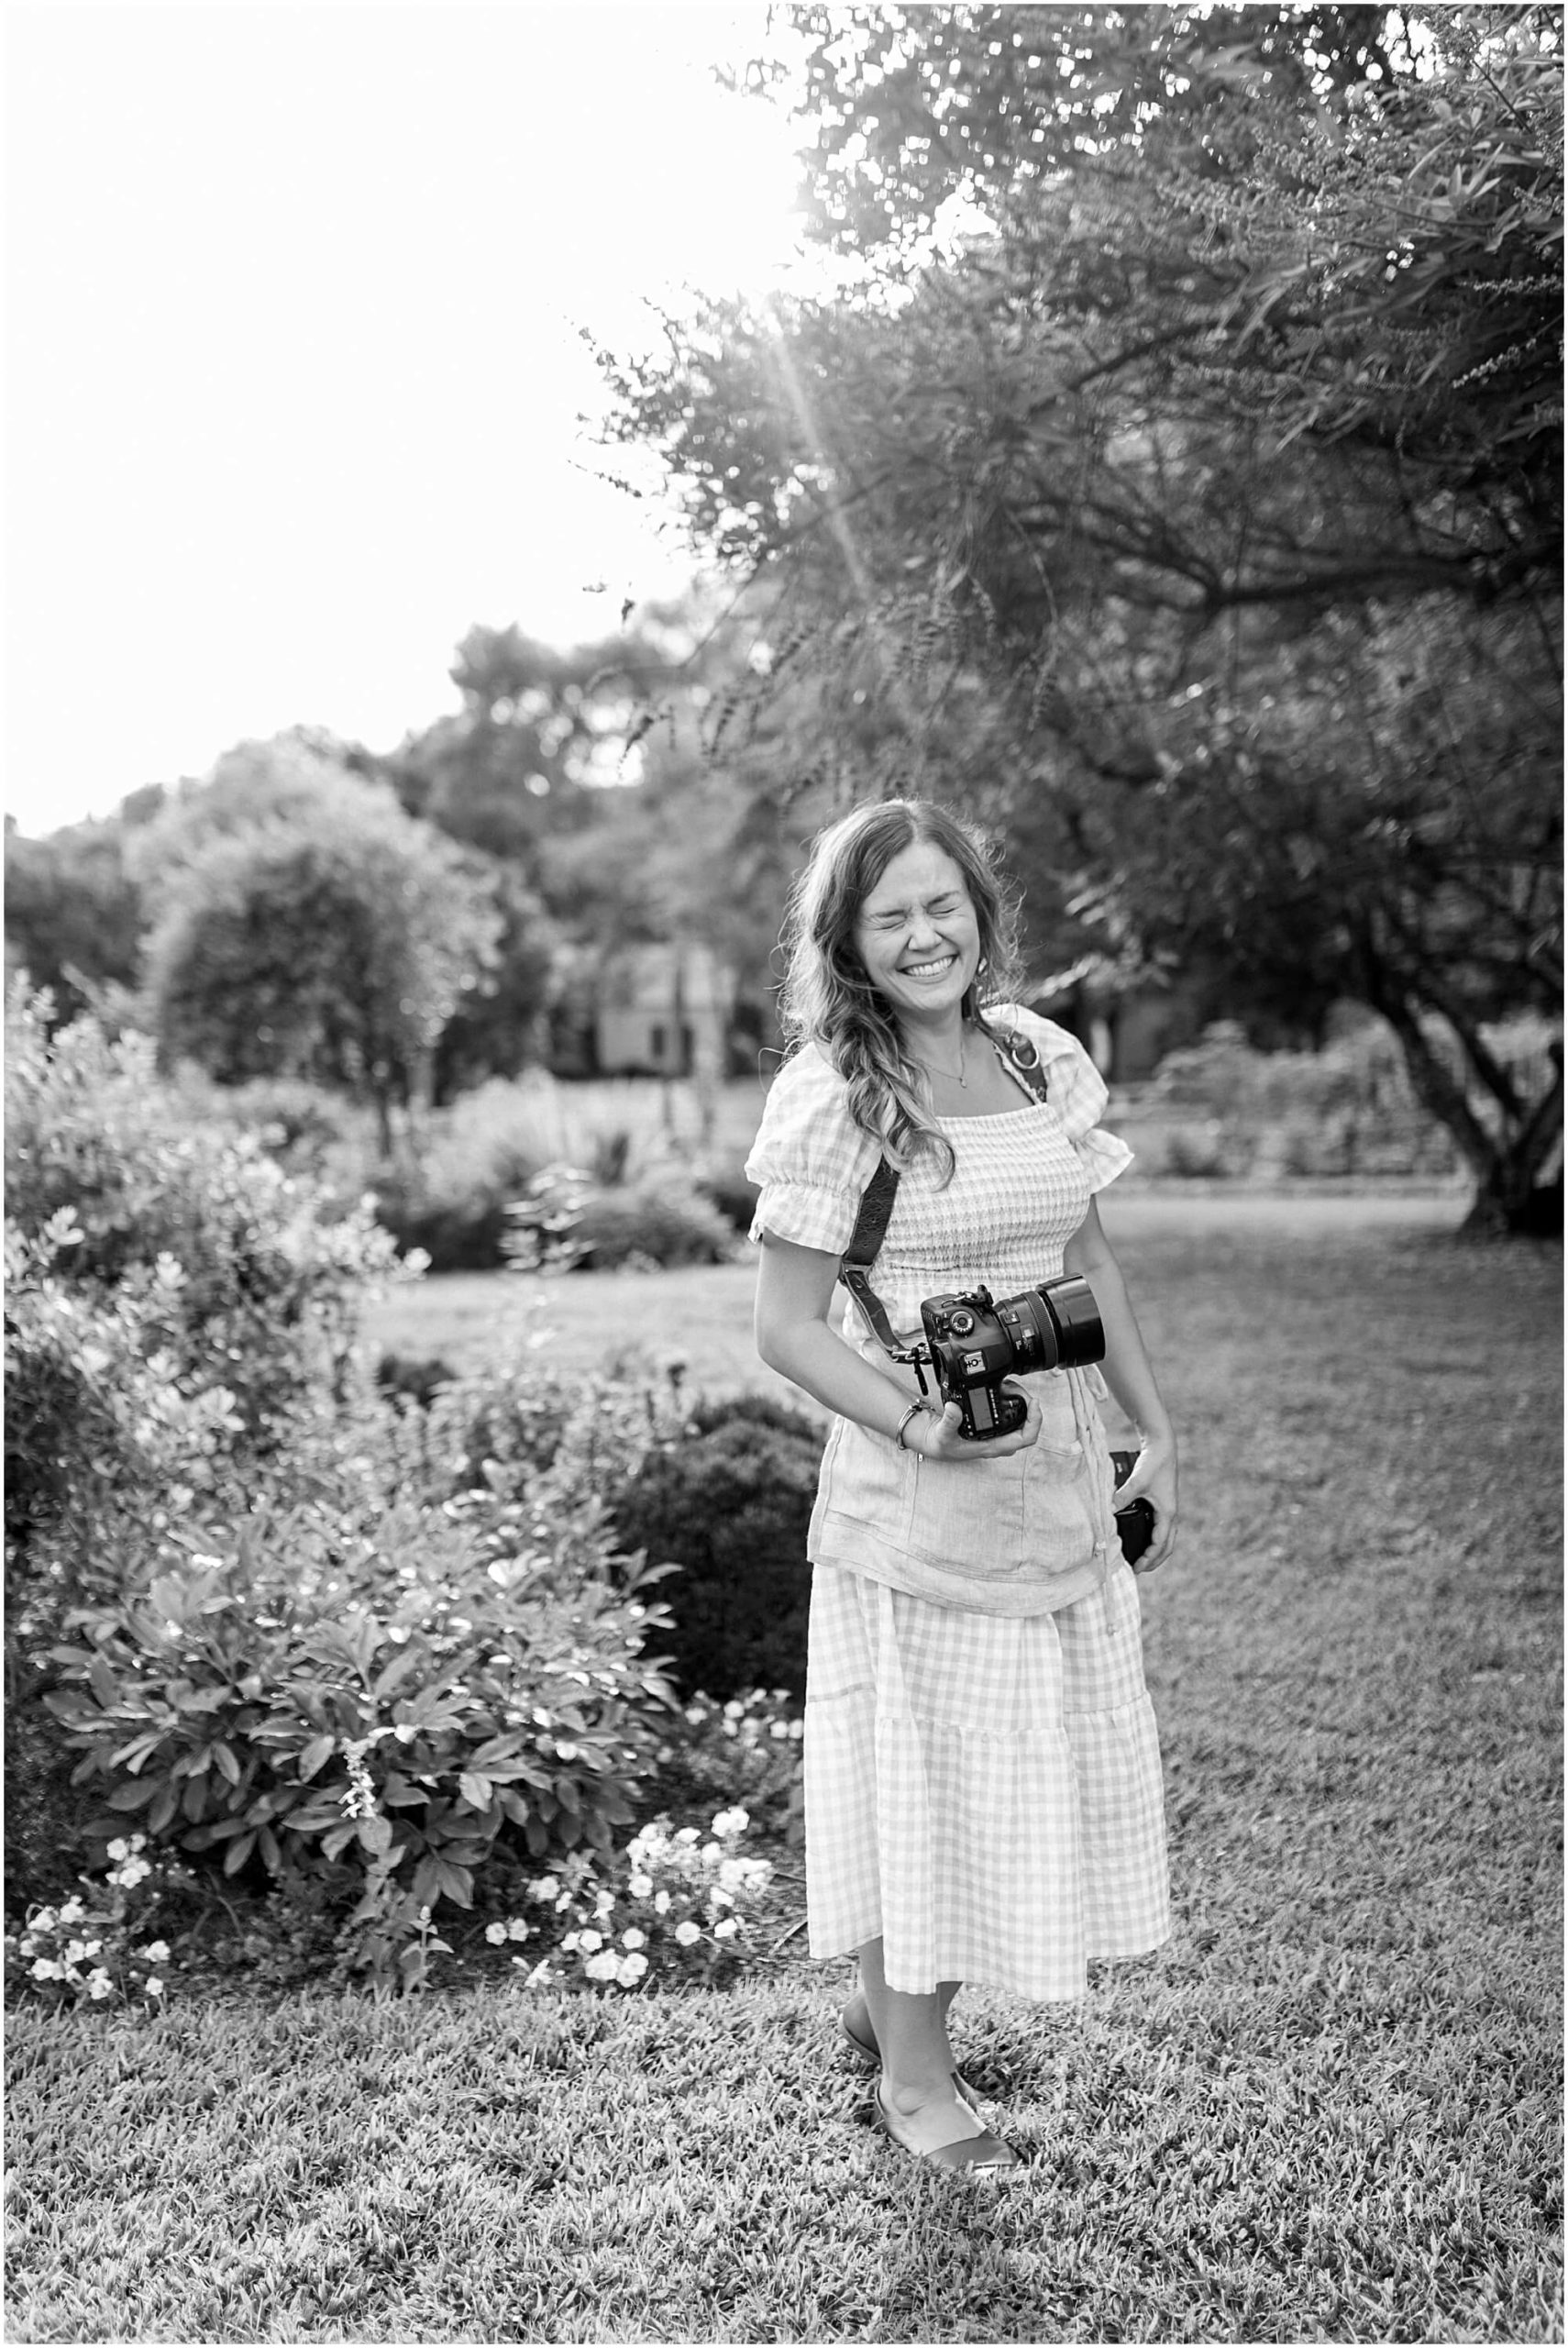 Black and while image of photographer at The Historic Tuckahoe Plantation